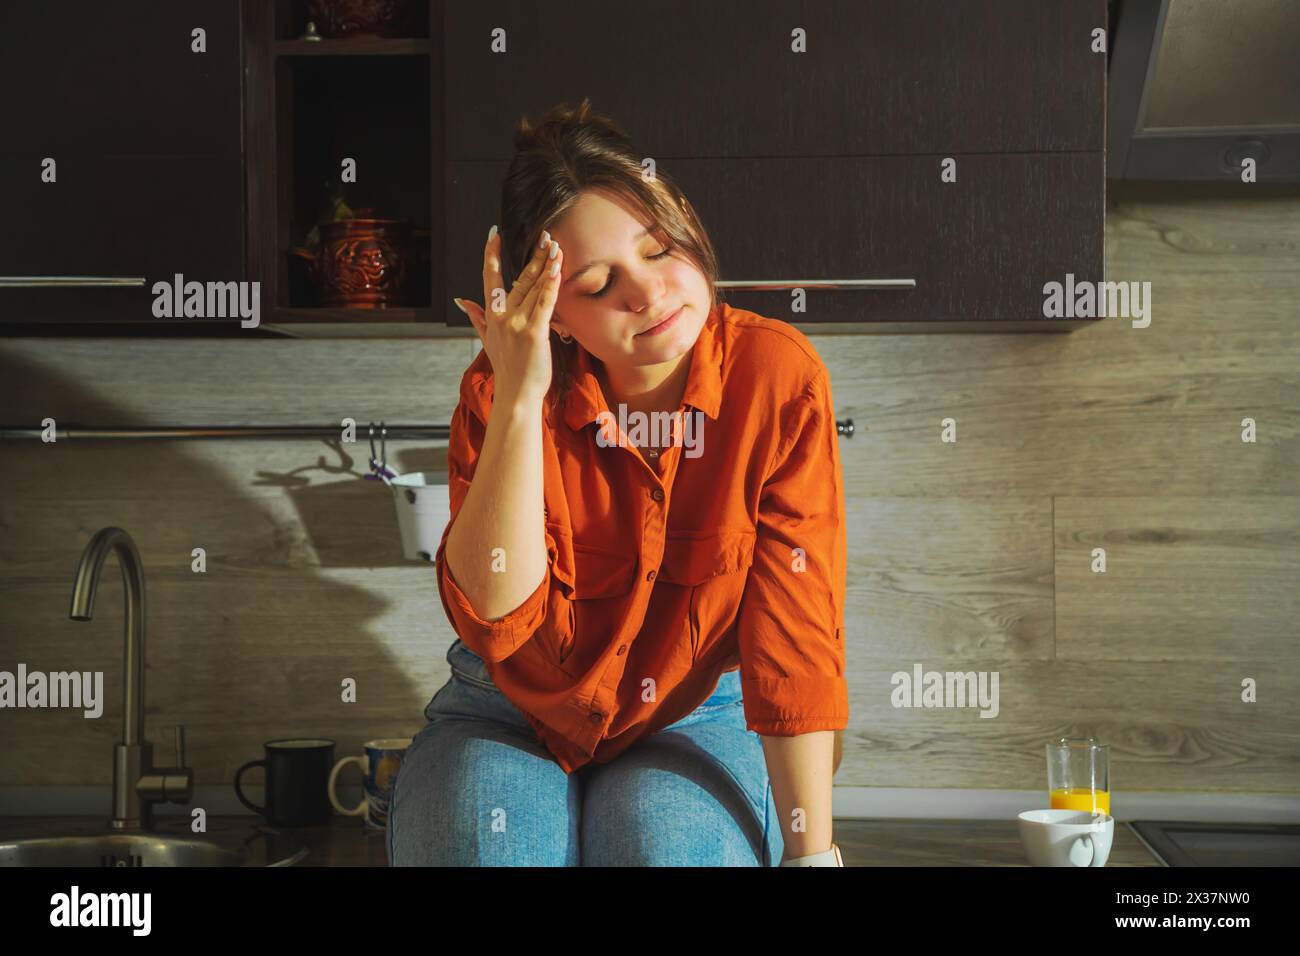 Sad young woman sitting on the kitchen countertop. Portrait of a young housewife looking worried, tired and overworked. Stock Photo